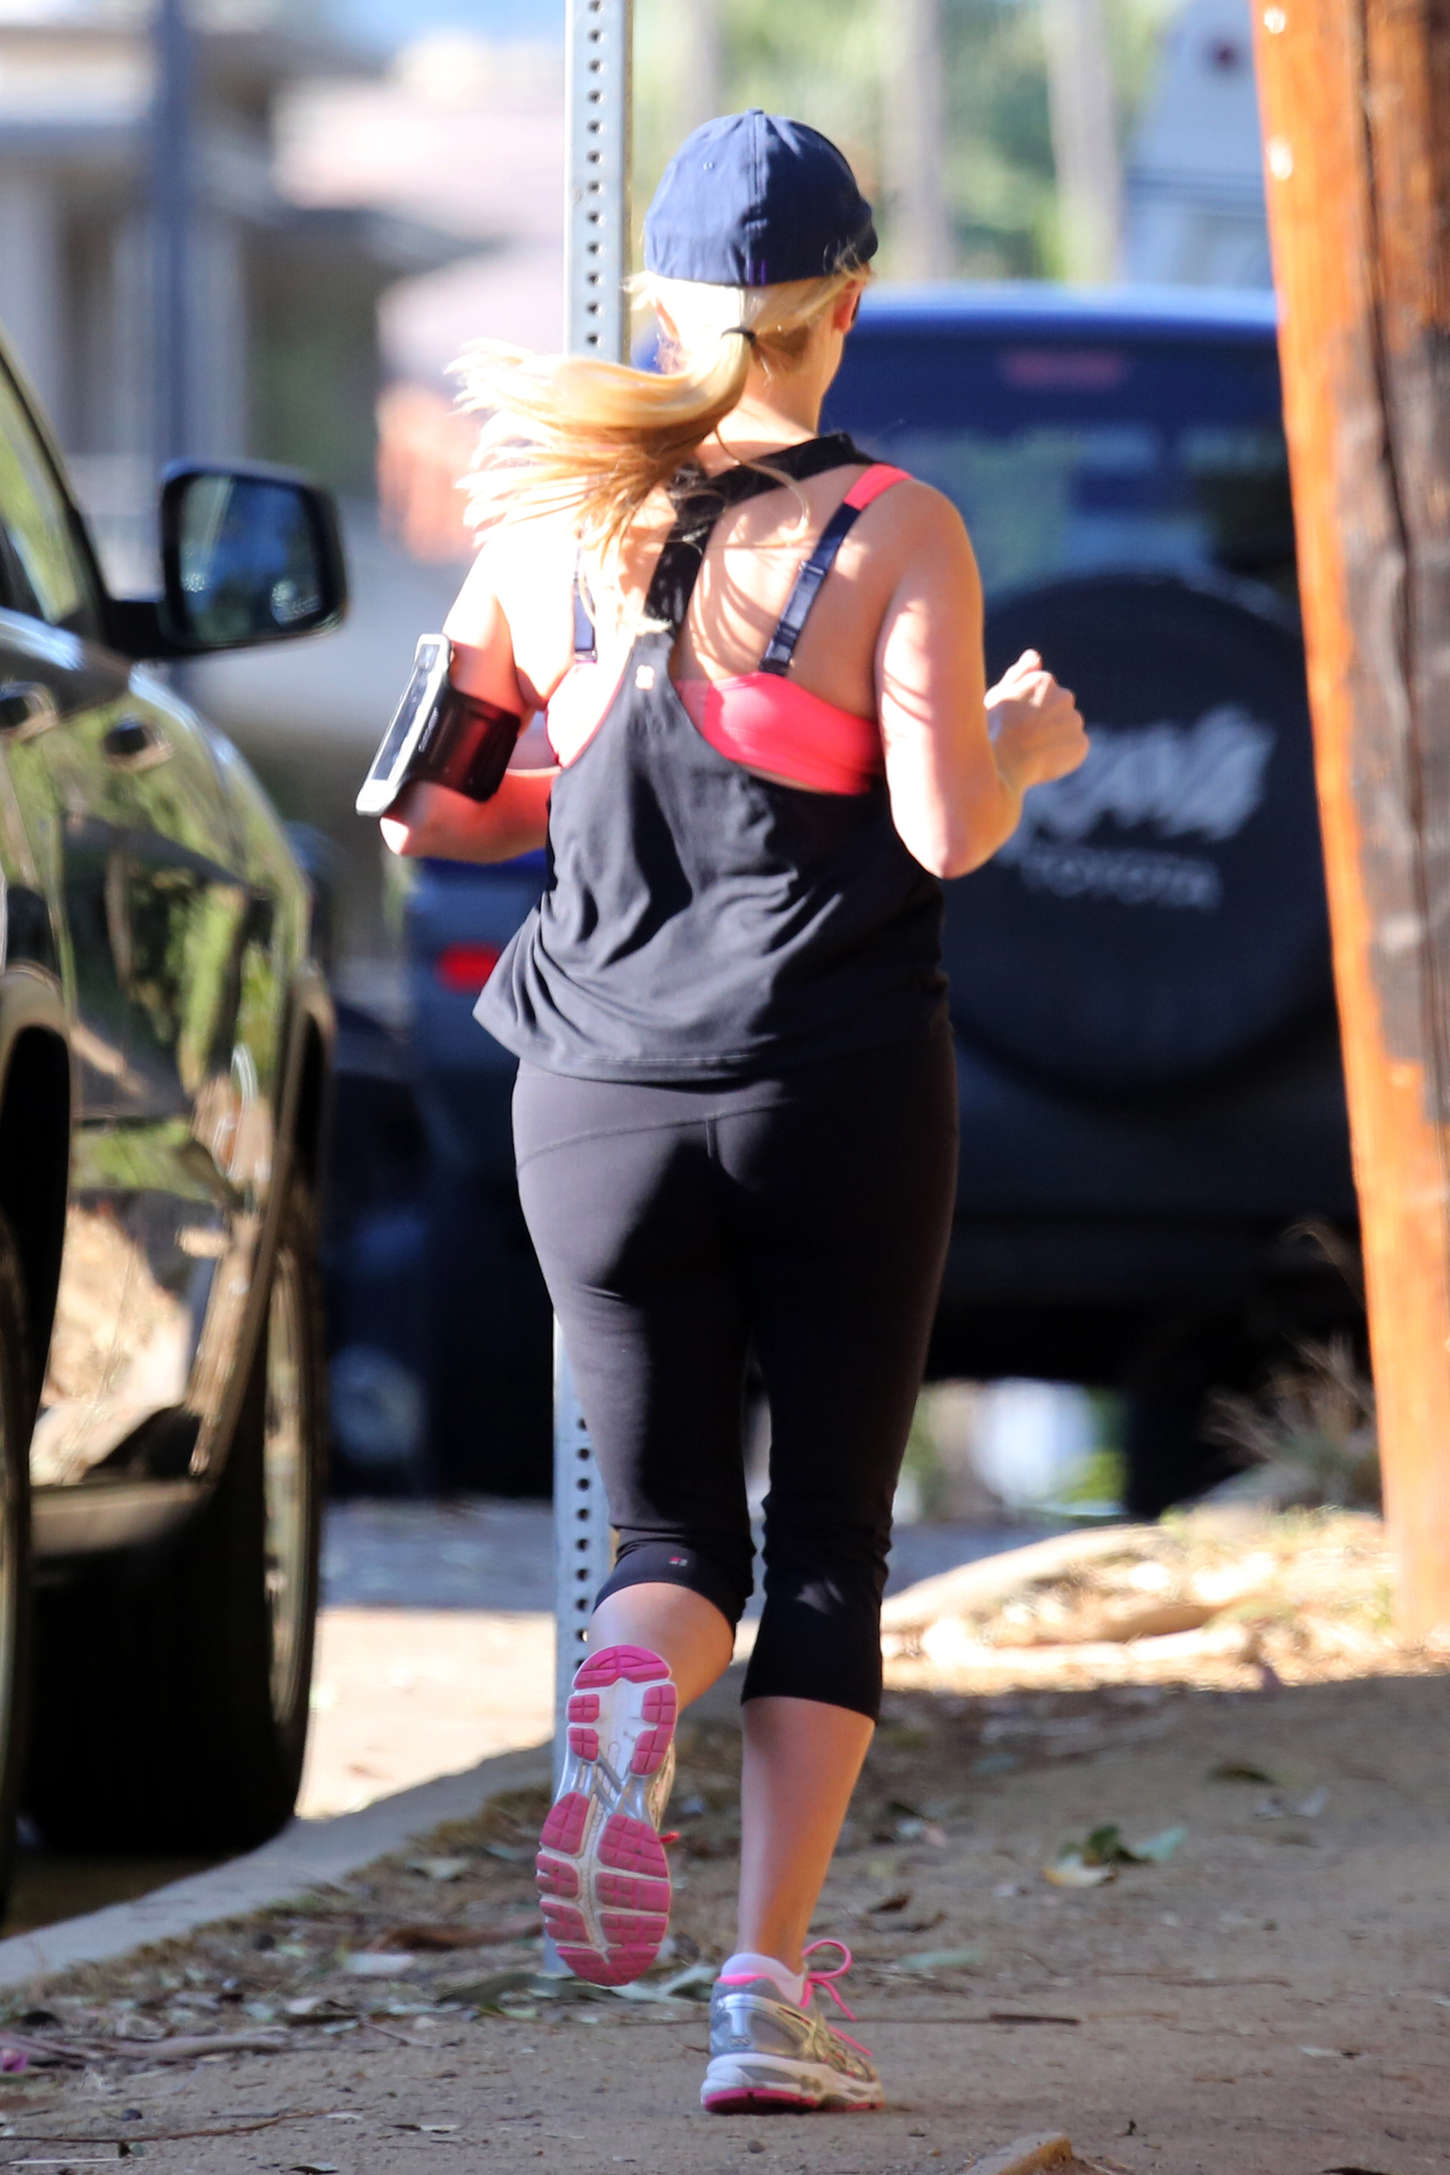 Reese Witherspoon 2015 : Reese Witherspoon in Tights Jogging -24. 